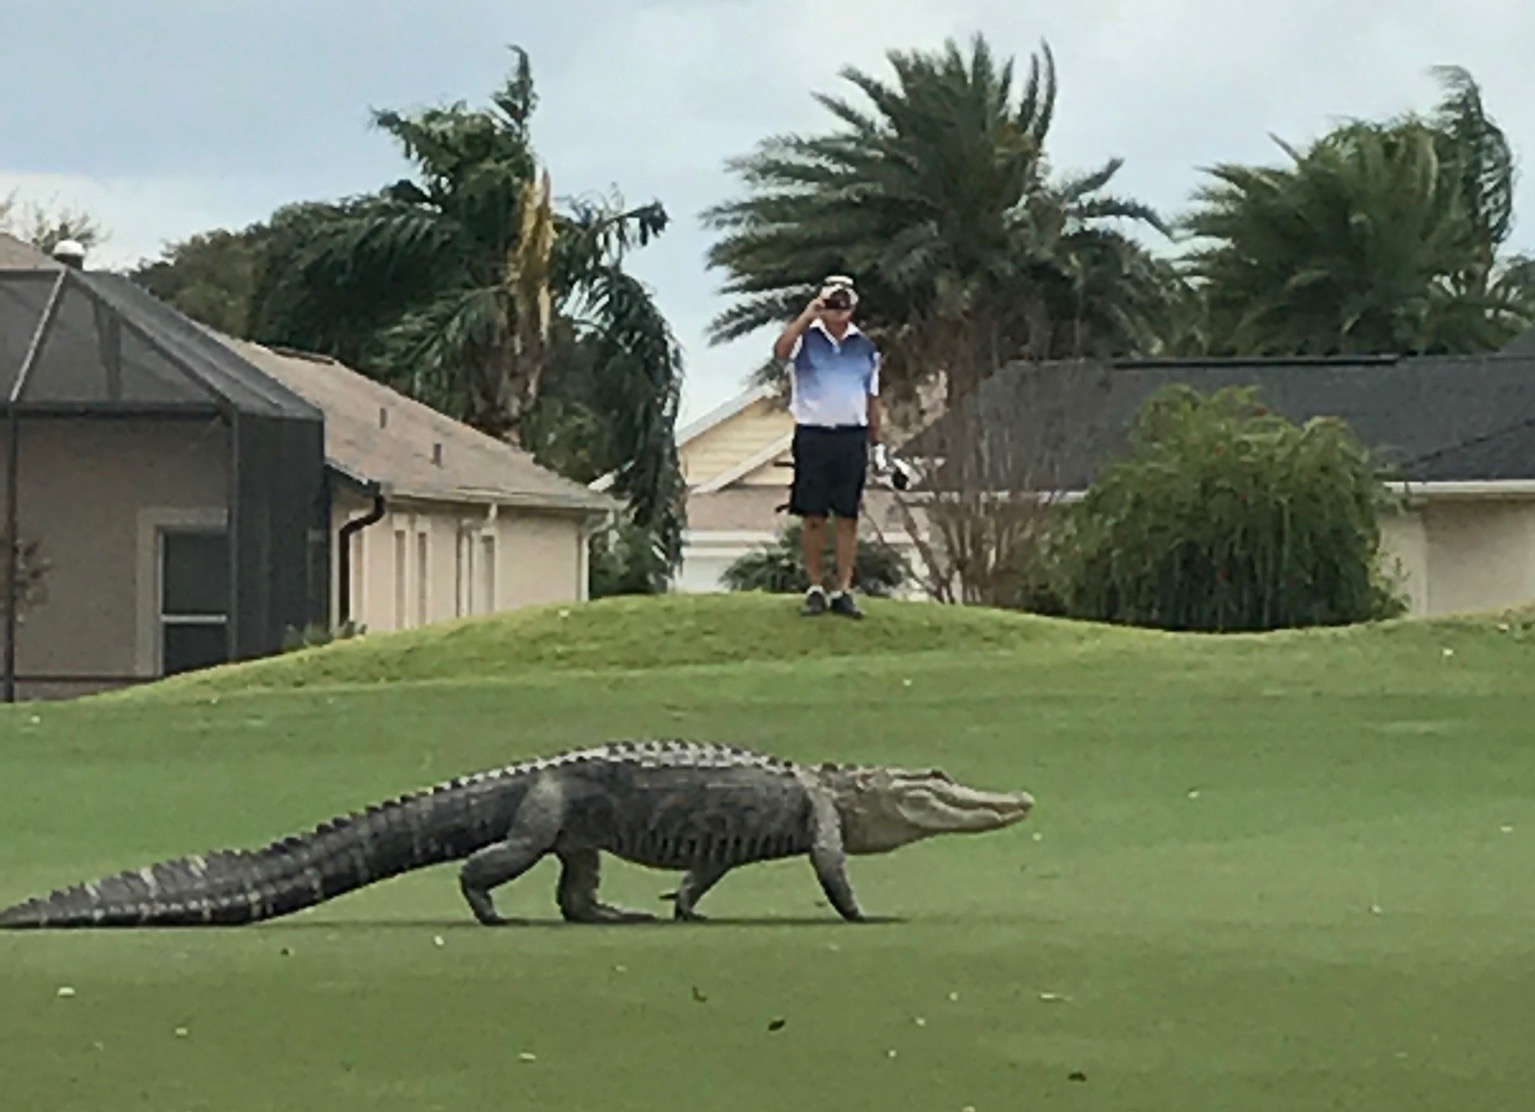 Cliff-Jennings-shot-this-photo-of-an-alligator-at-Cane-Garden-Championship-Golf-Course.jpg